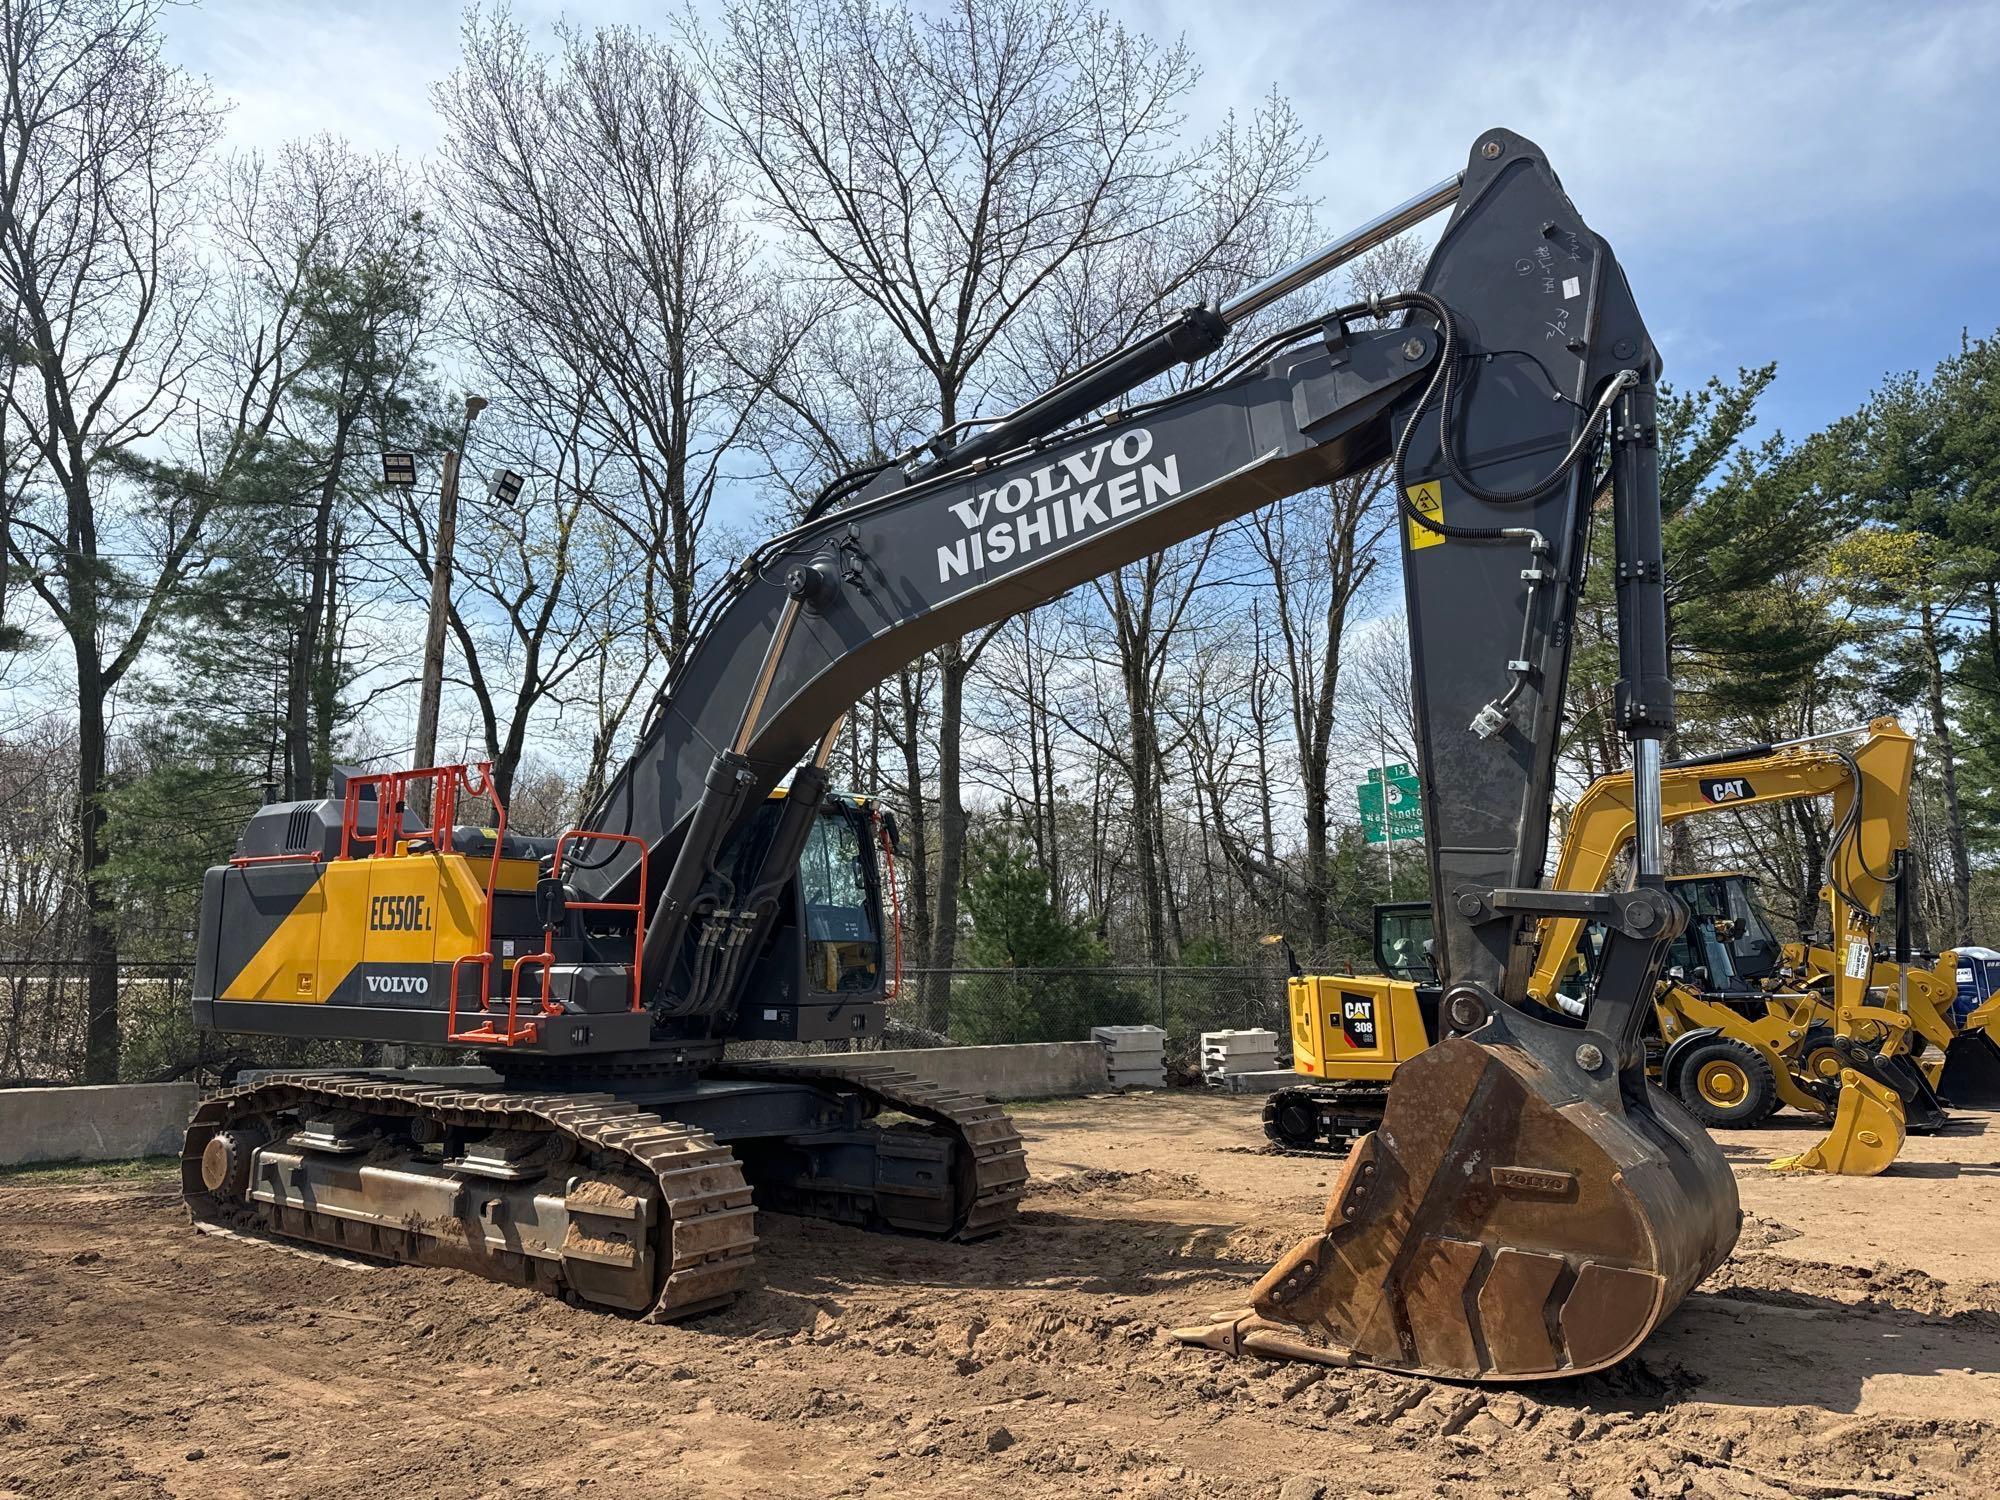 2022 VOLVO EC550EL HYDRAULIC EXCAVATOR SN-00075... ...powered by diesel engine, equipped with Cab, a